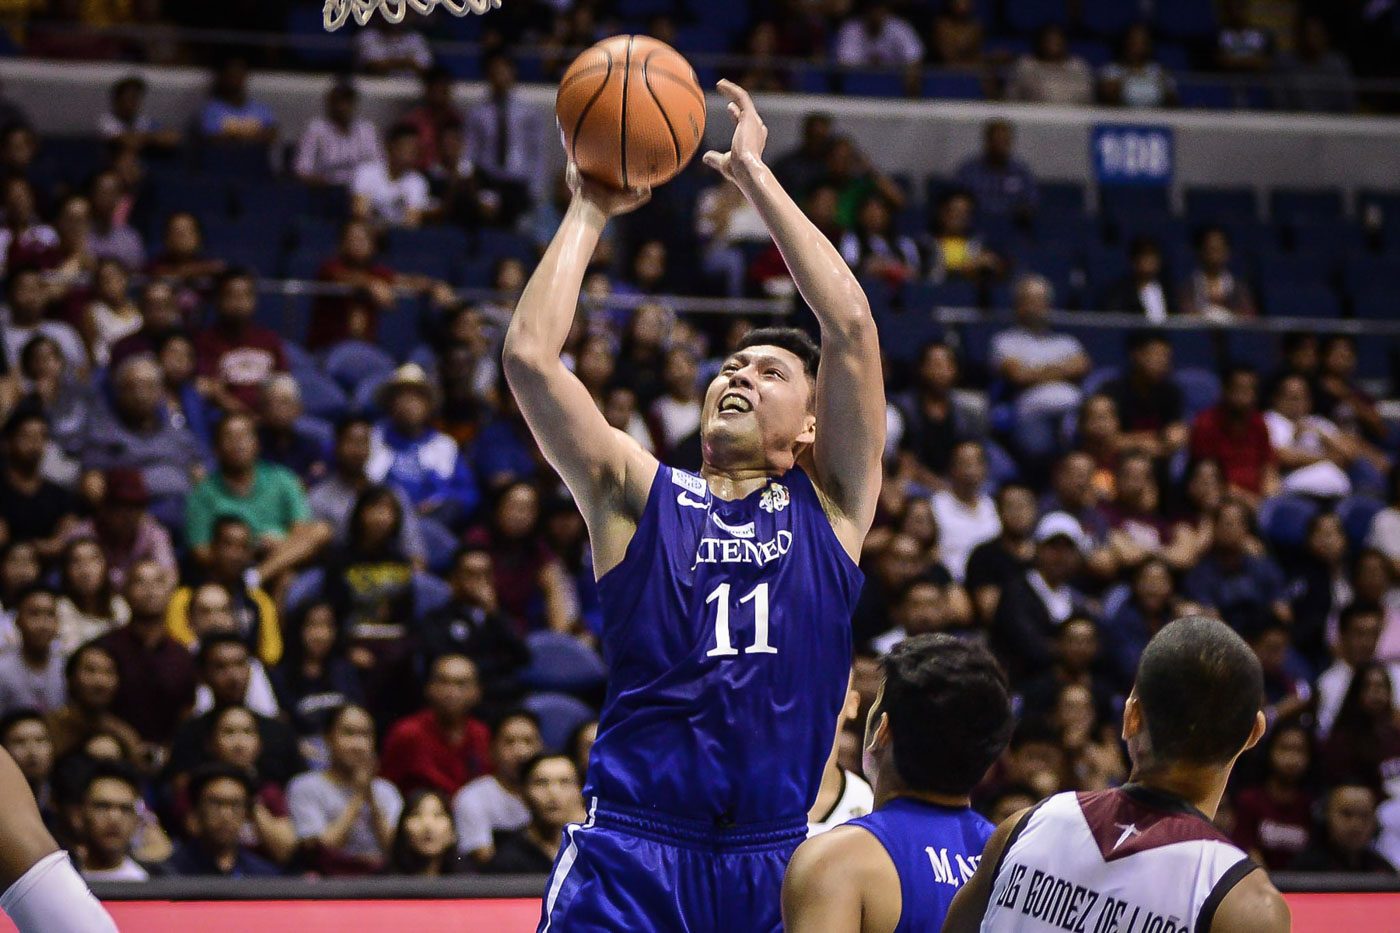 No ‘I’ in team: the evolution of Ateneo’s play style in the Baldwin era